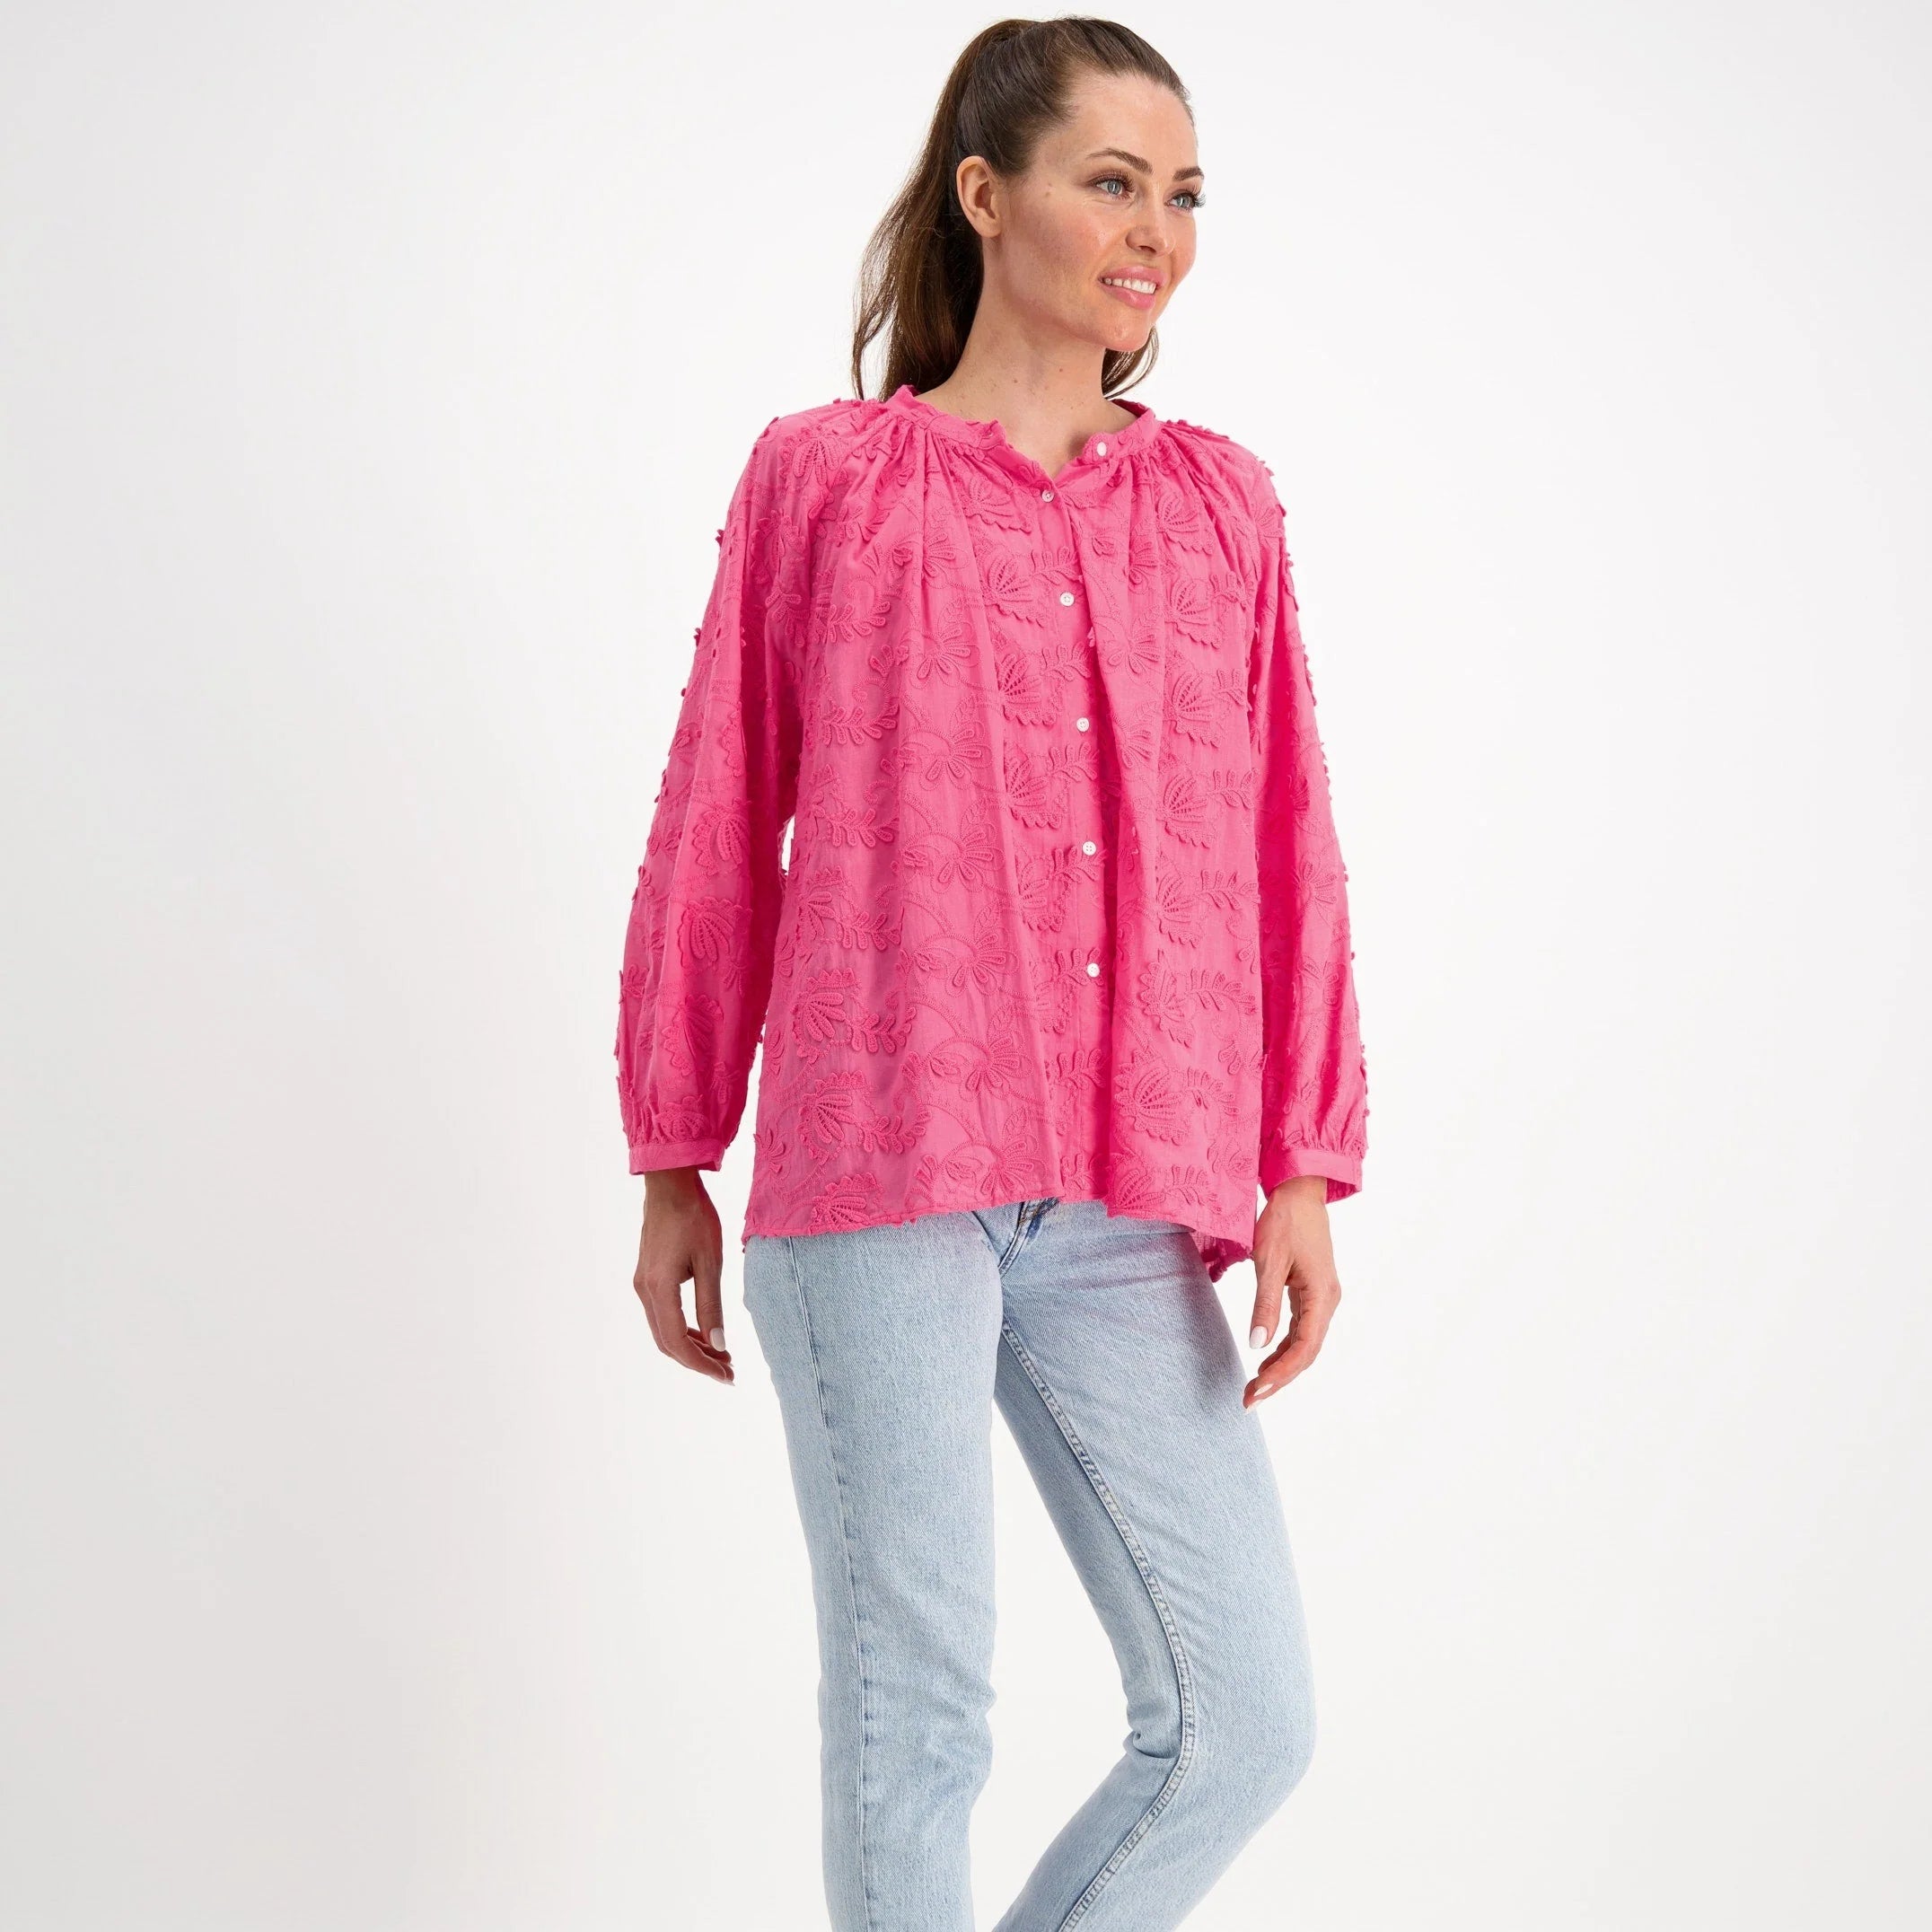 Sorority Pink Embroidered Cotton Blouse/Shirt